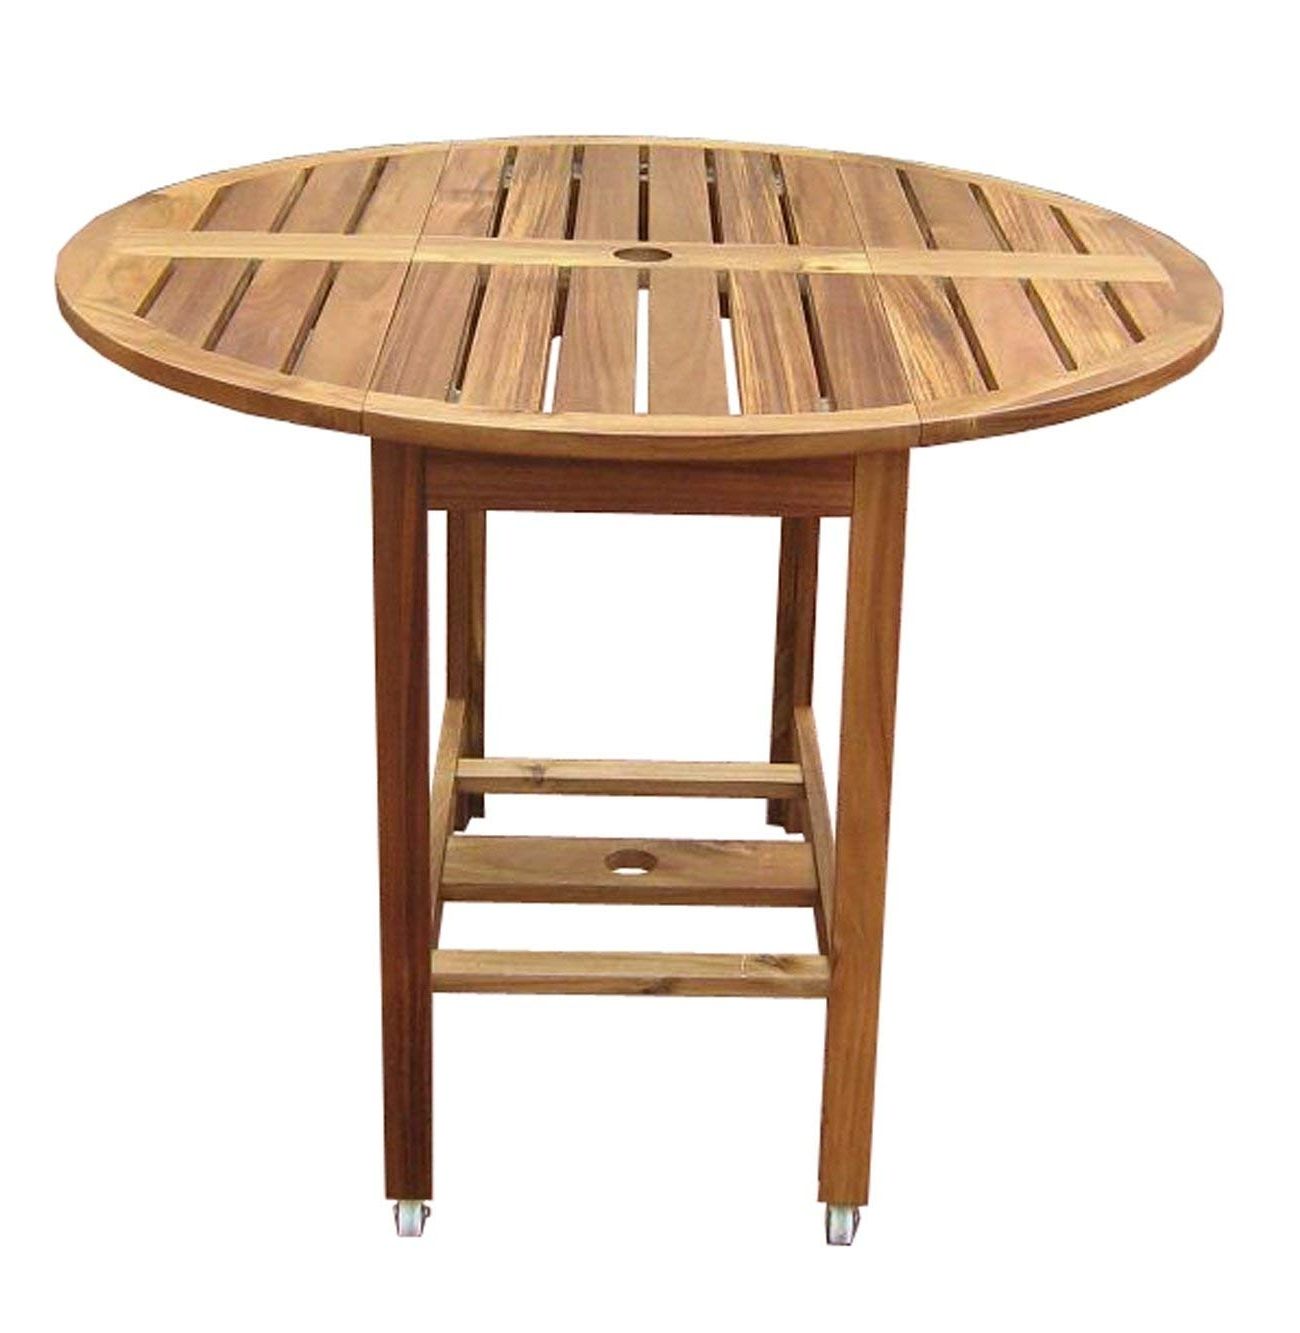 Folding Outdoor Dining Tables Throughout Favorite Amazon : Merry Garden Acacia Folding Dining Table : Folding (Photo 5 of 25)